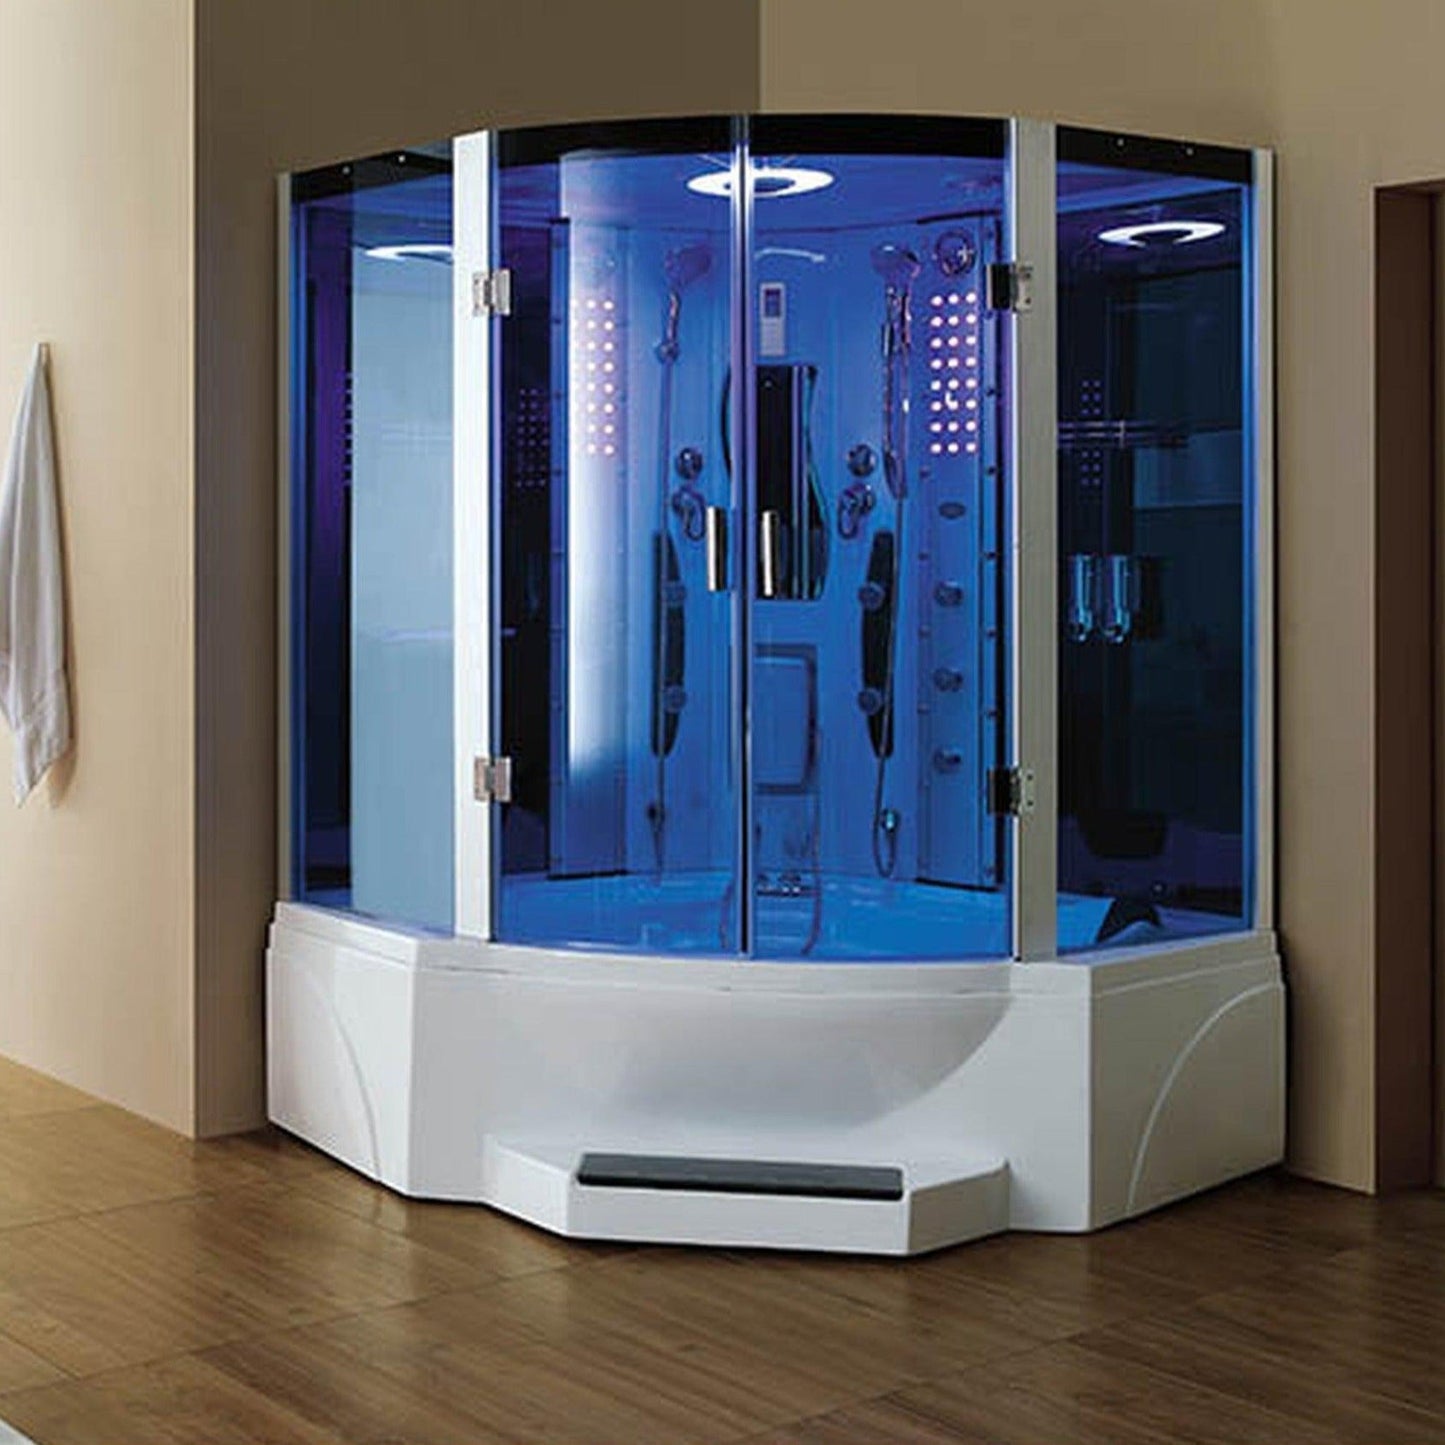 Mesa 63" x 63" x 85" Blue Tempered Glass Corner Combination Steam Shower Jetted Tub With 3kW High Output Steam Engine, 10 Acupuncture Jets and 10 Whirlpool Jets